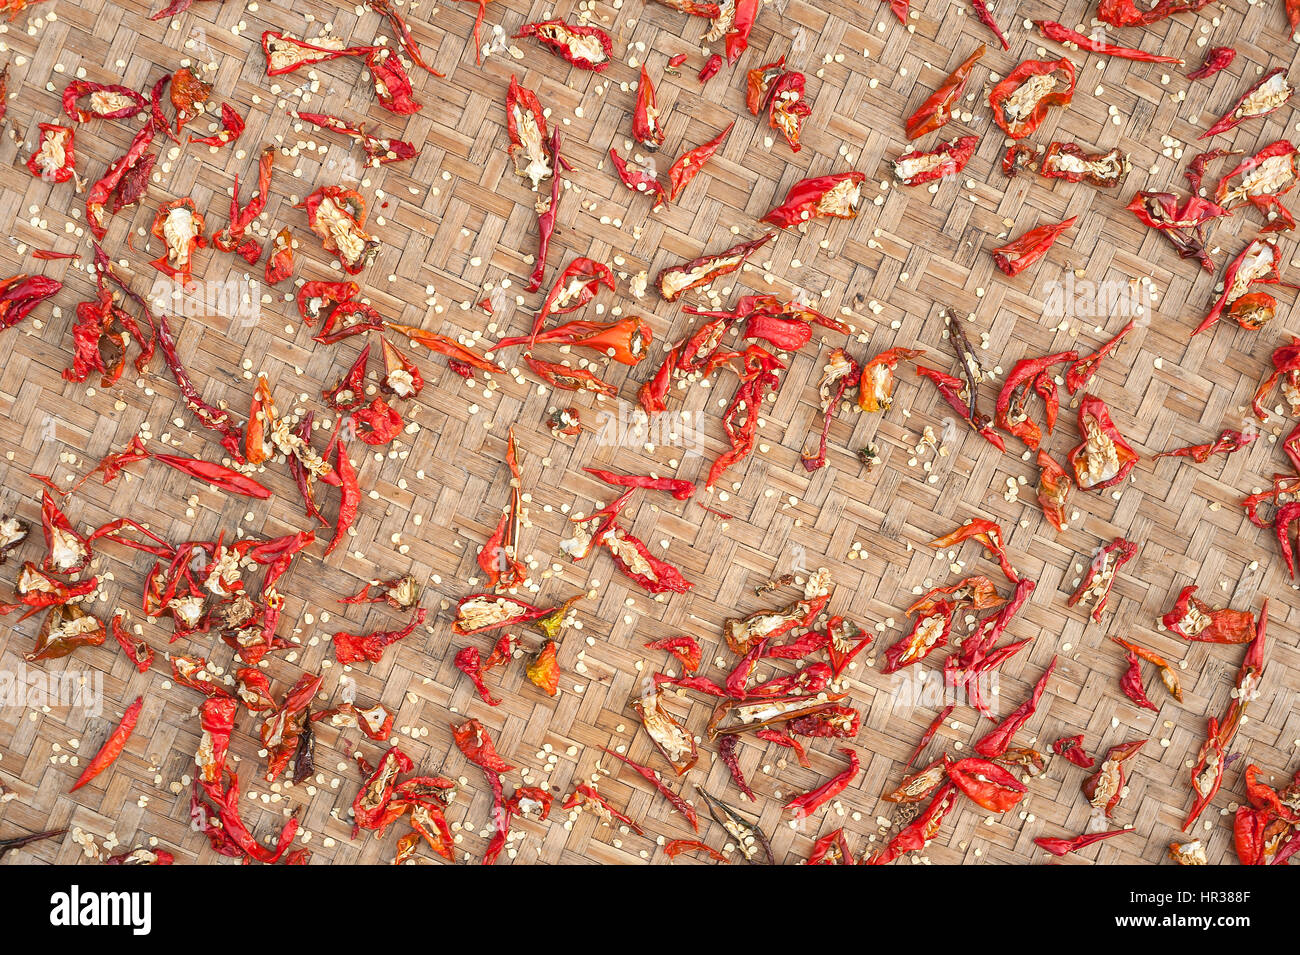 Red chili peppers drying in the sun Stock Photo